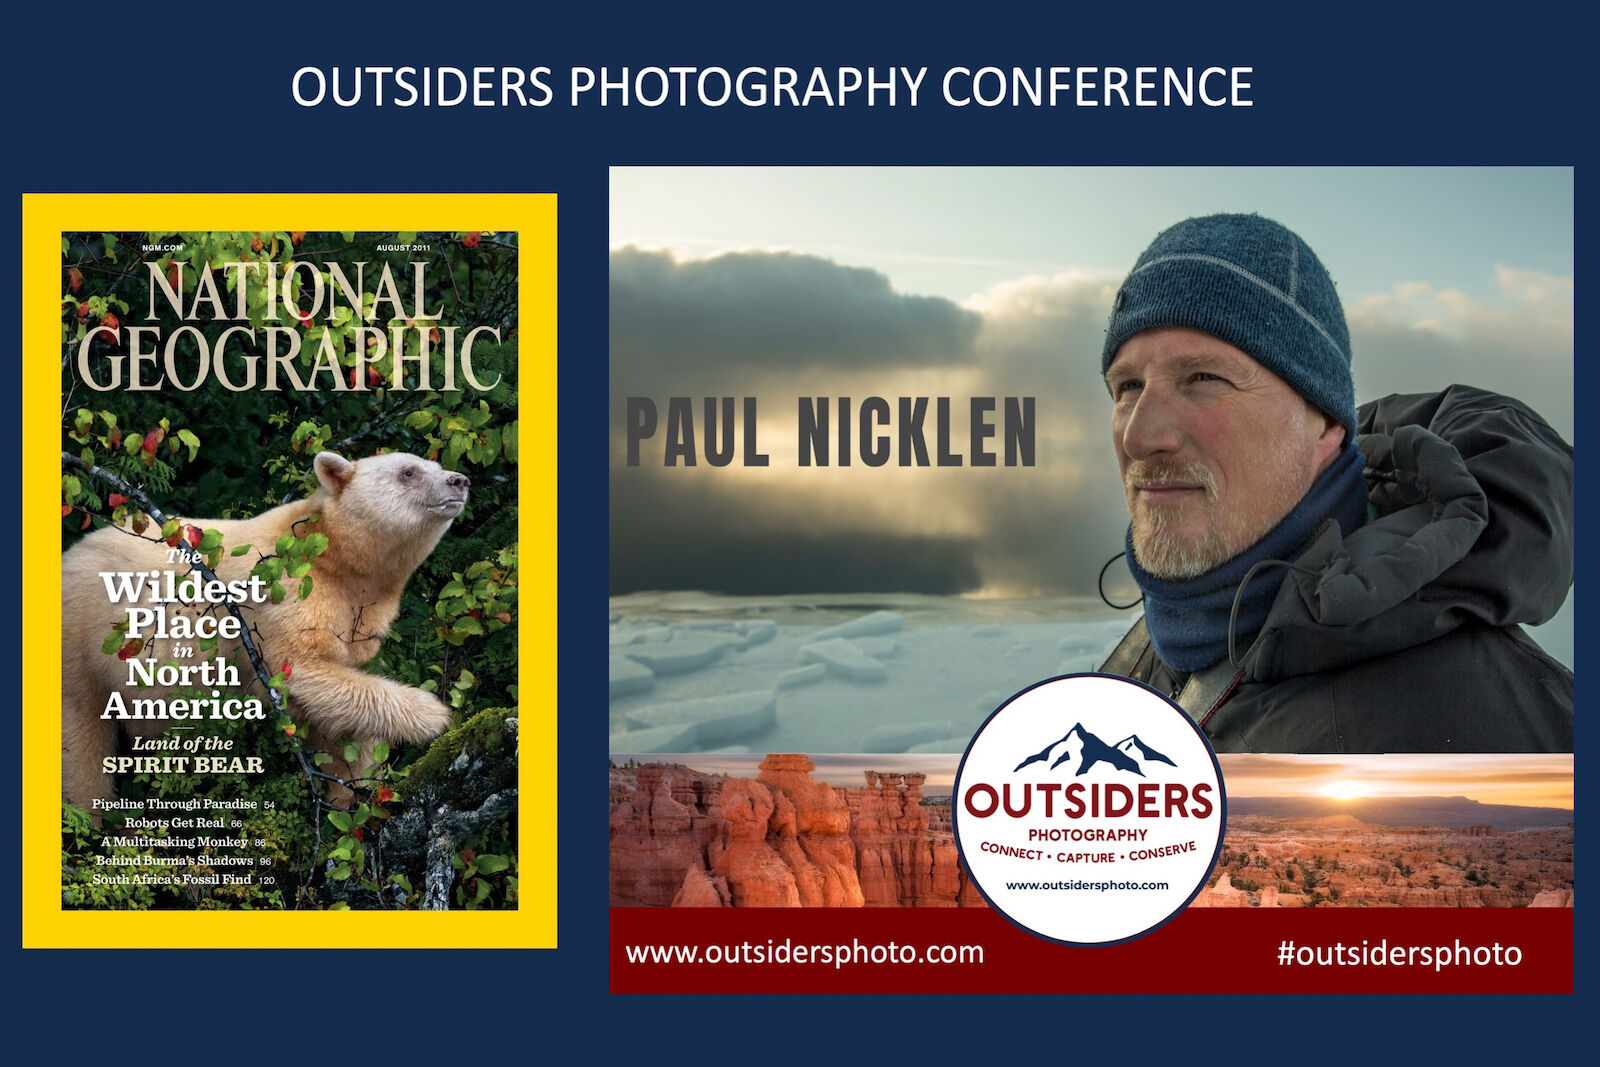 Paul Nicklen Outsiders Photography Conference